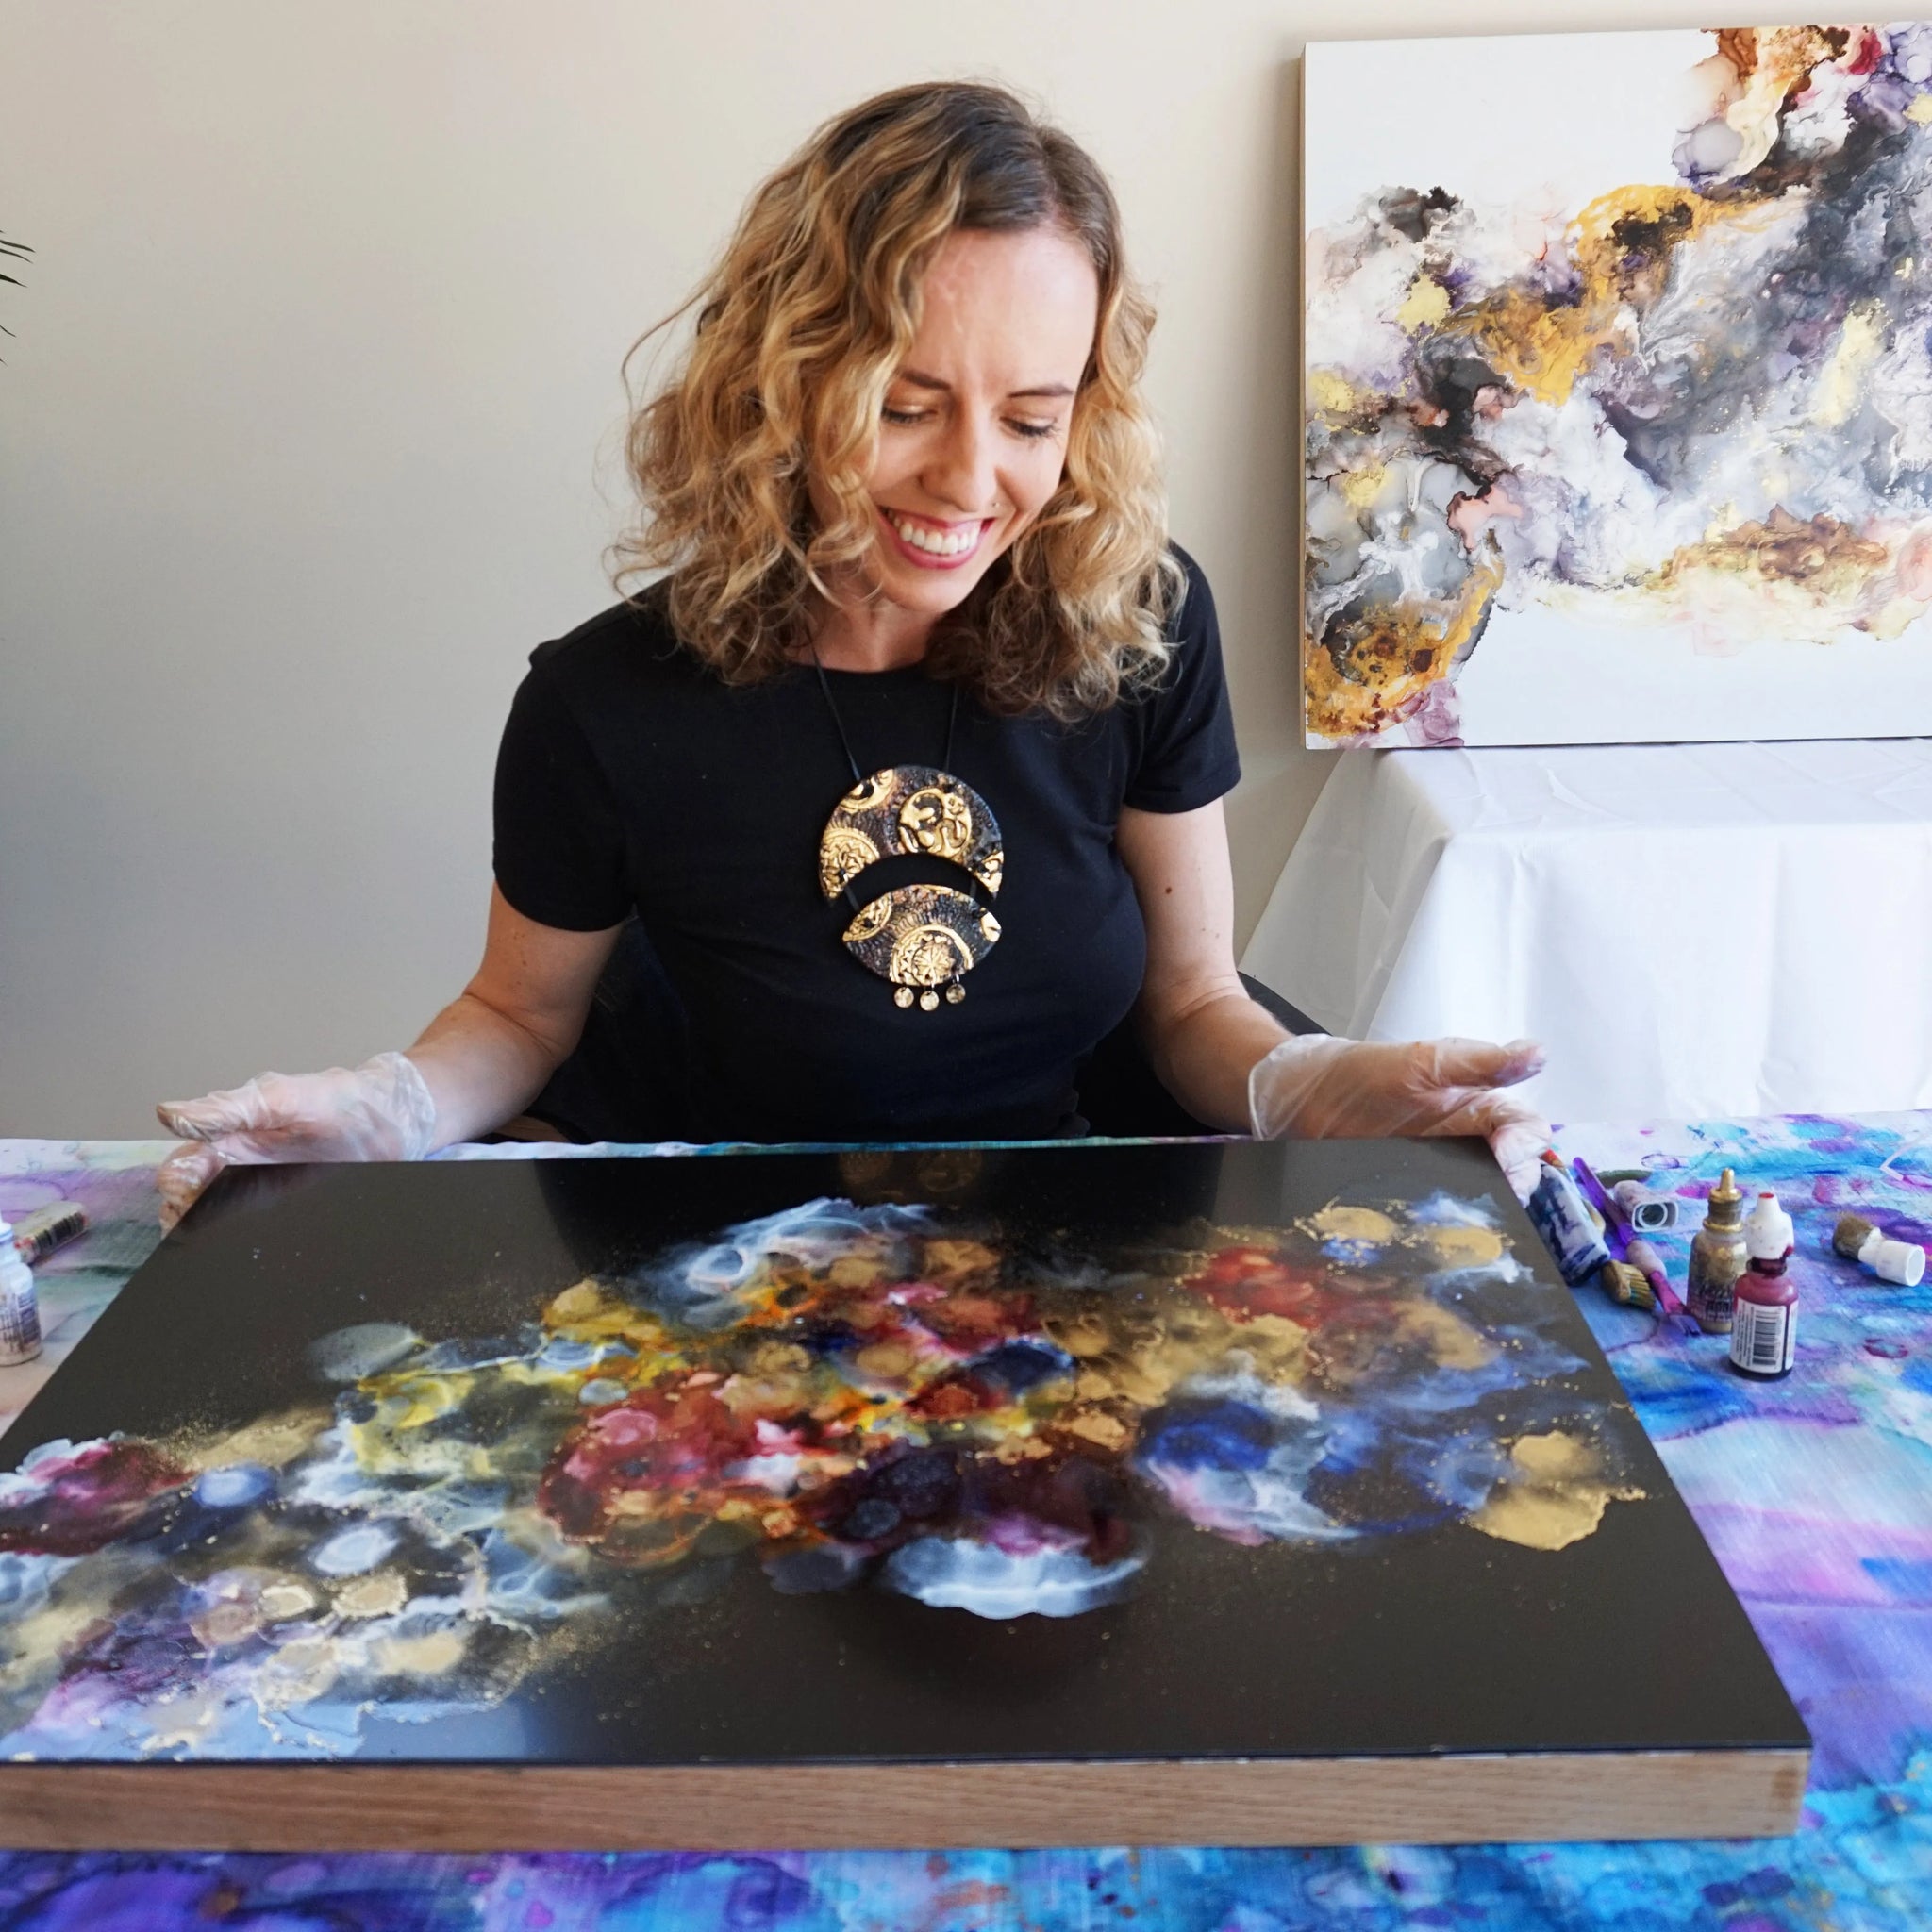 Online Tutorial – Galaxy art using Alcohol Inks on Black board – unlimited access